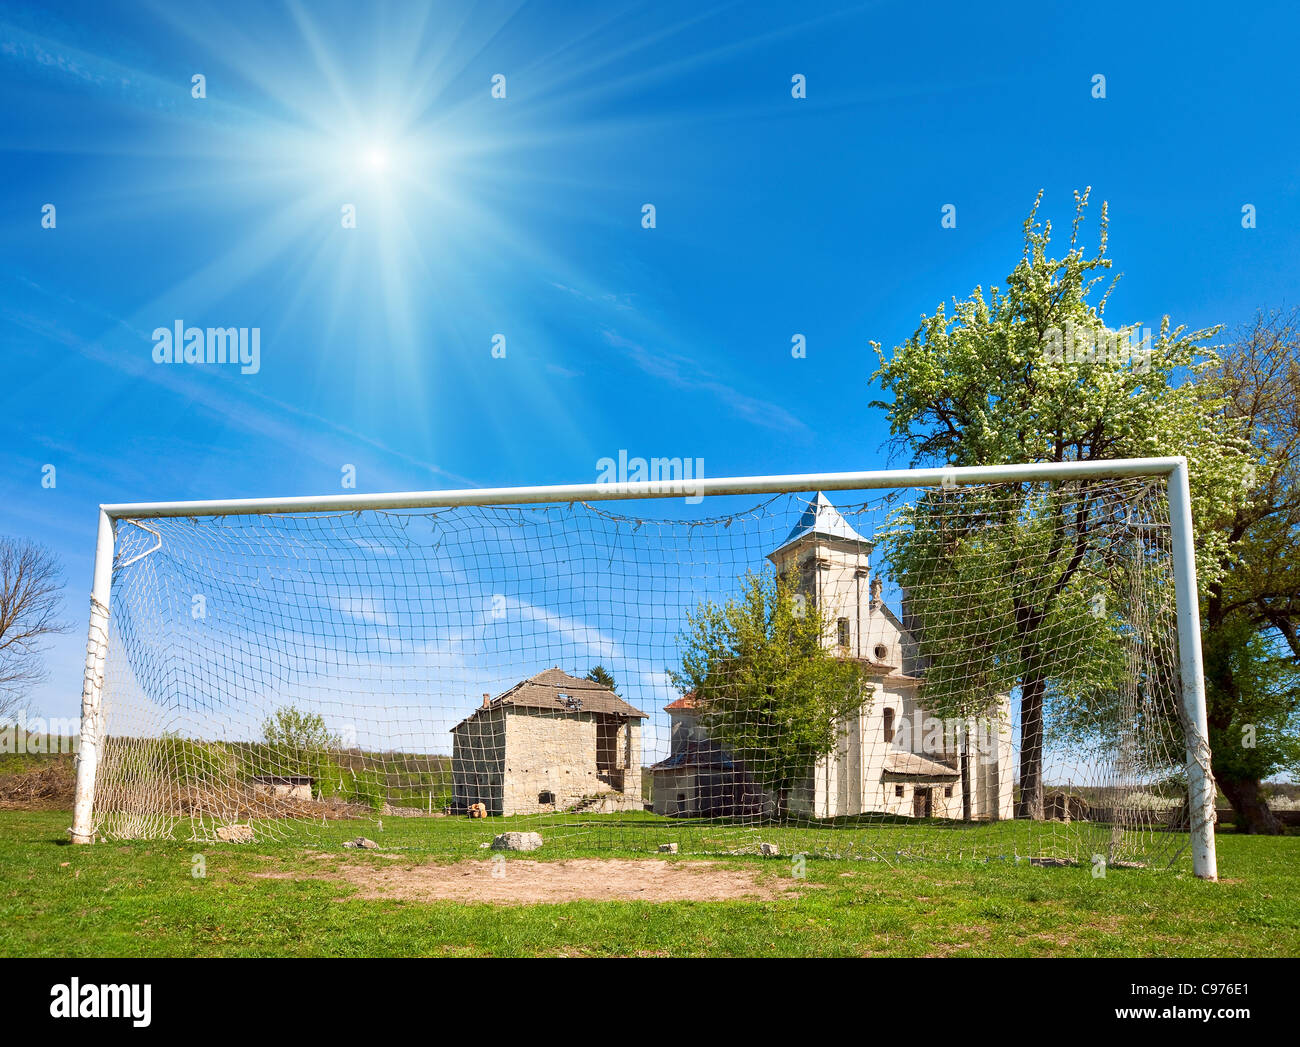 Church of Annunciation of Blessed Virgin Mary (Sydoriv village, Ternopil region, Ukraine, Built in 1726-1730) and football goal. Stock Photo